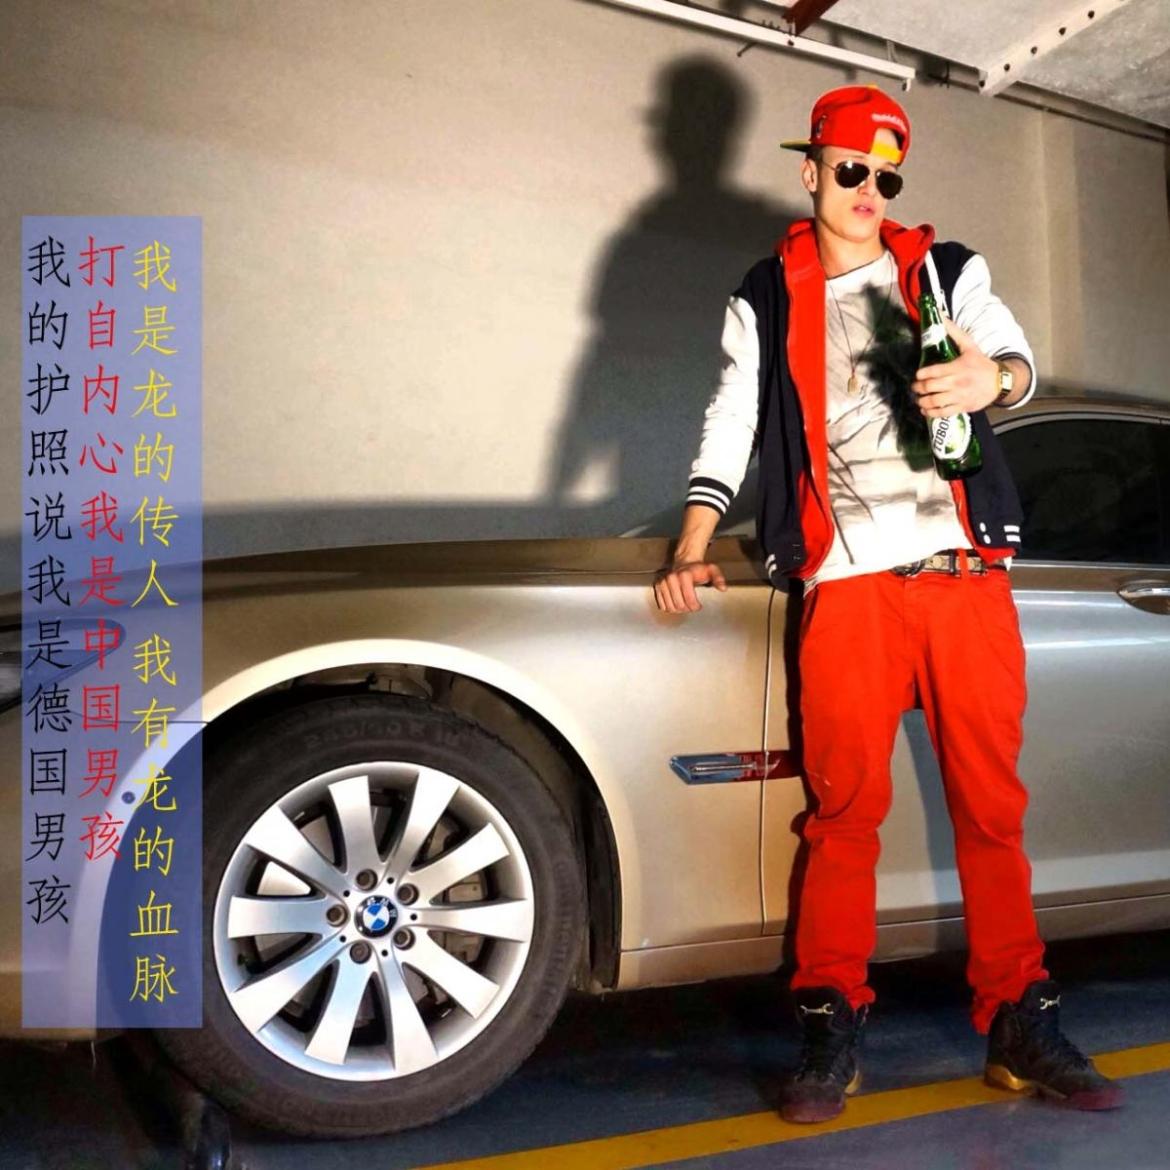 the only white rapper among 1,4 billion chinese people